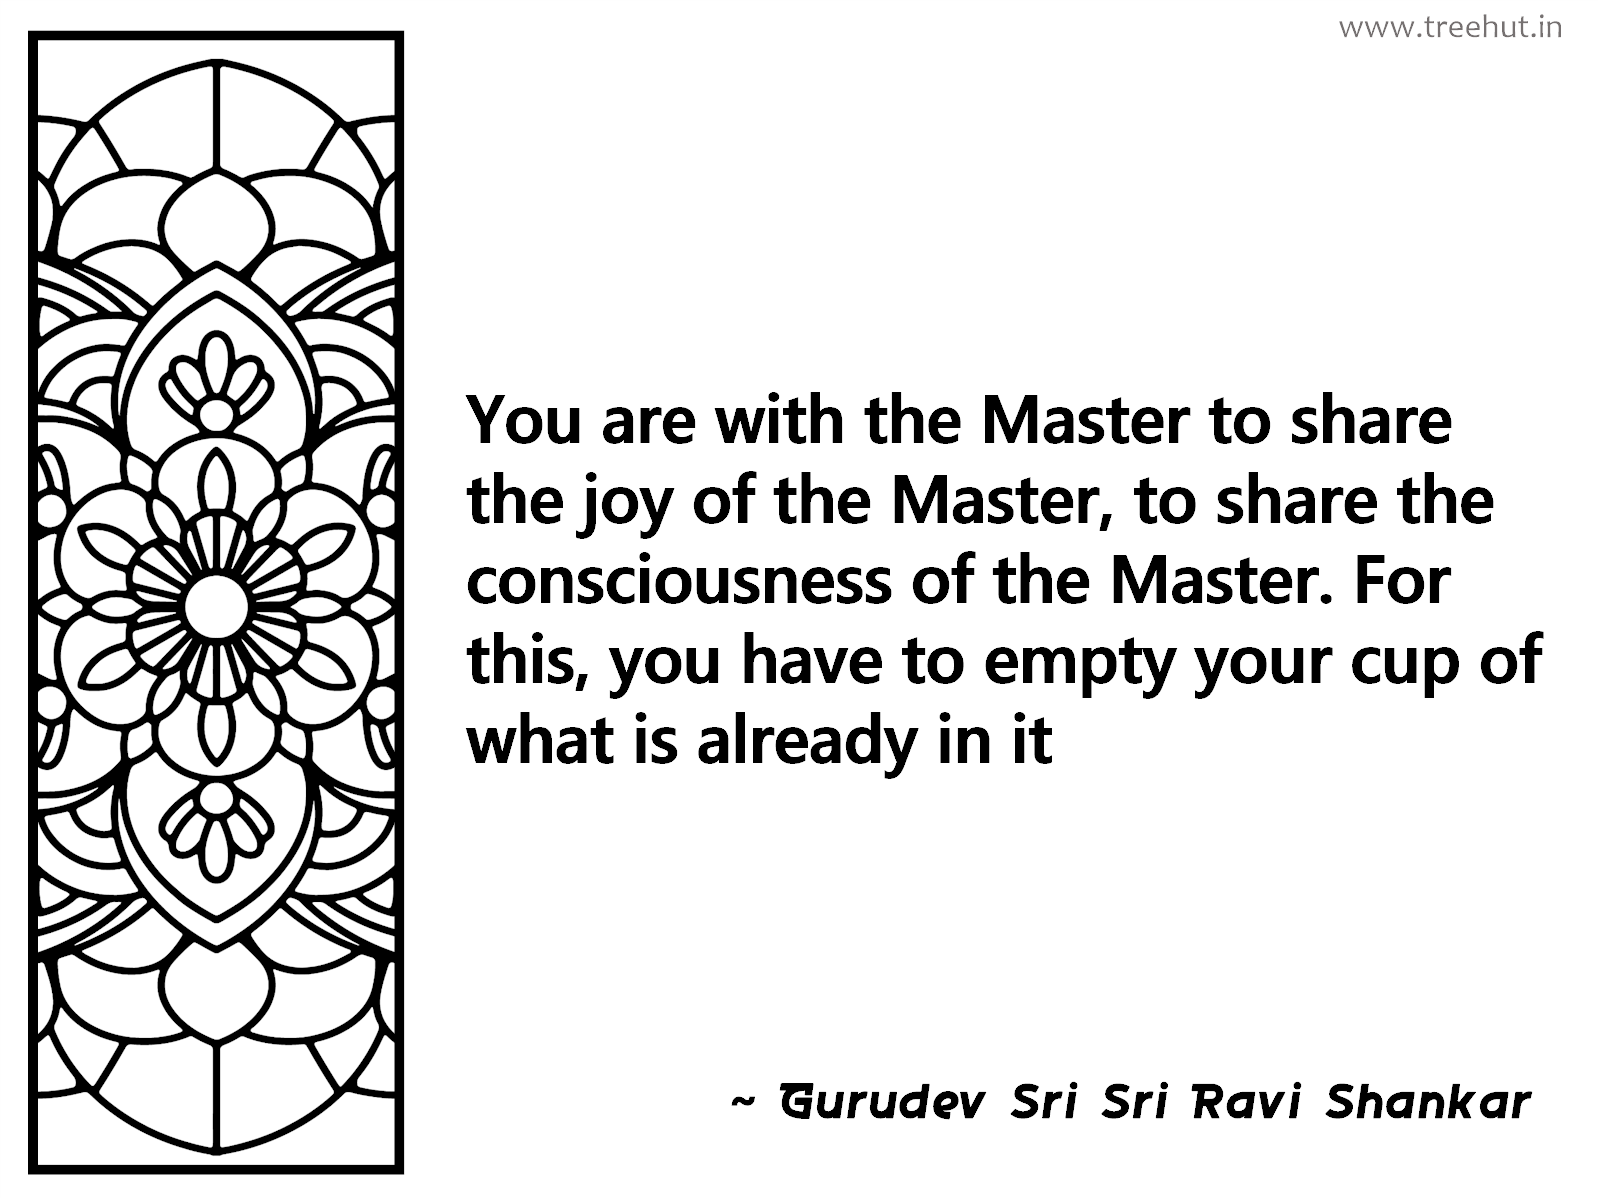 You are with the Master to share the joy of the Master, to share the consciousness of the Master. For this, you have to empty your cup of what is already in it Inspirational Quote by Gurudev Sri Sri Ravi Shankar, coloring pages